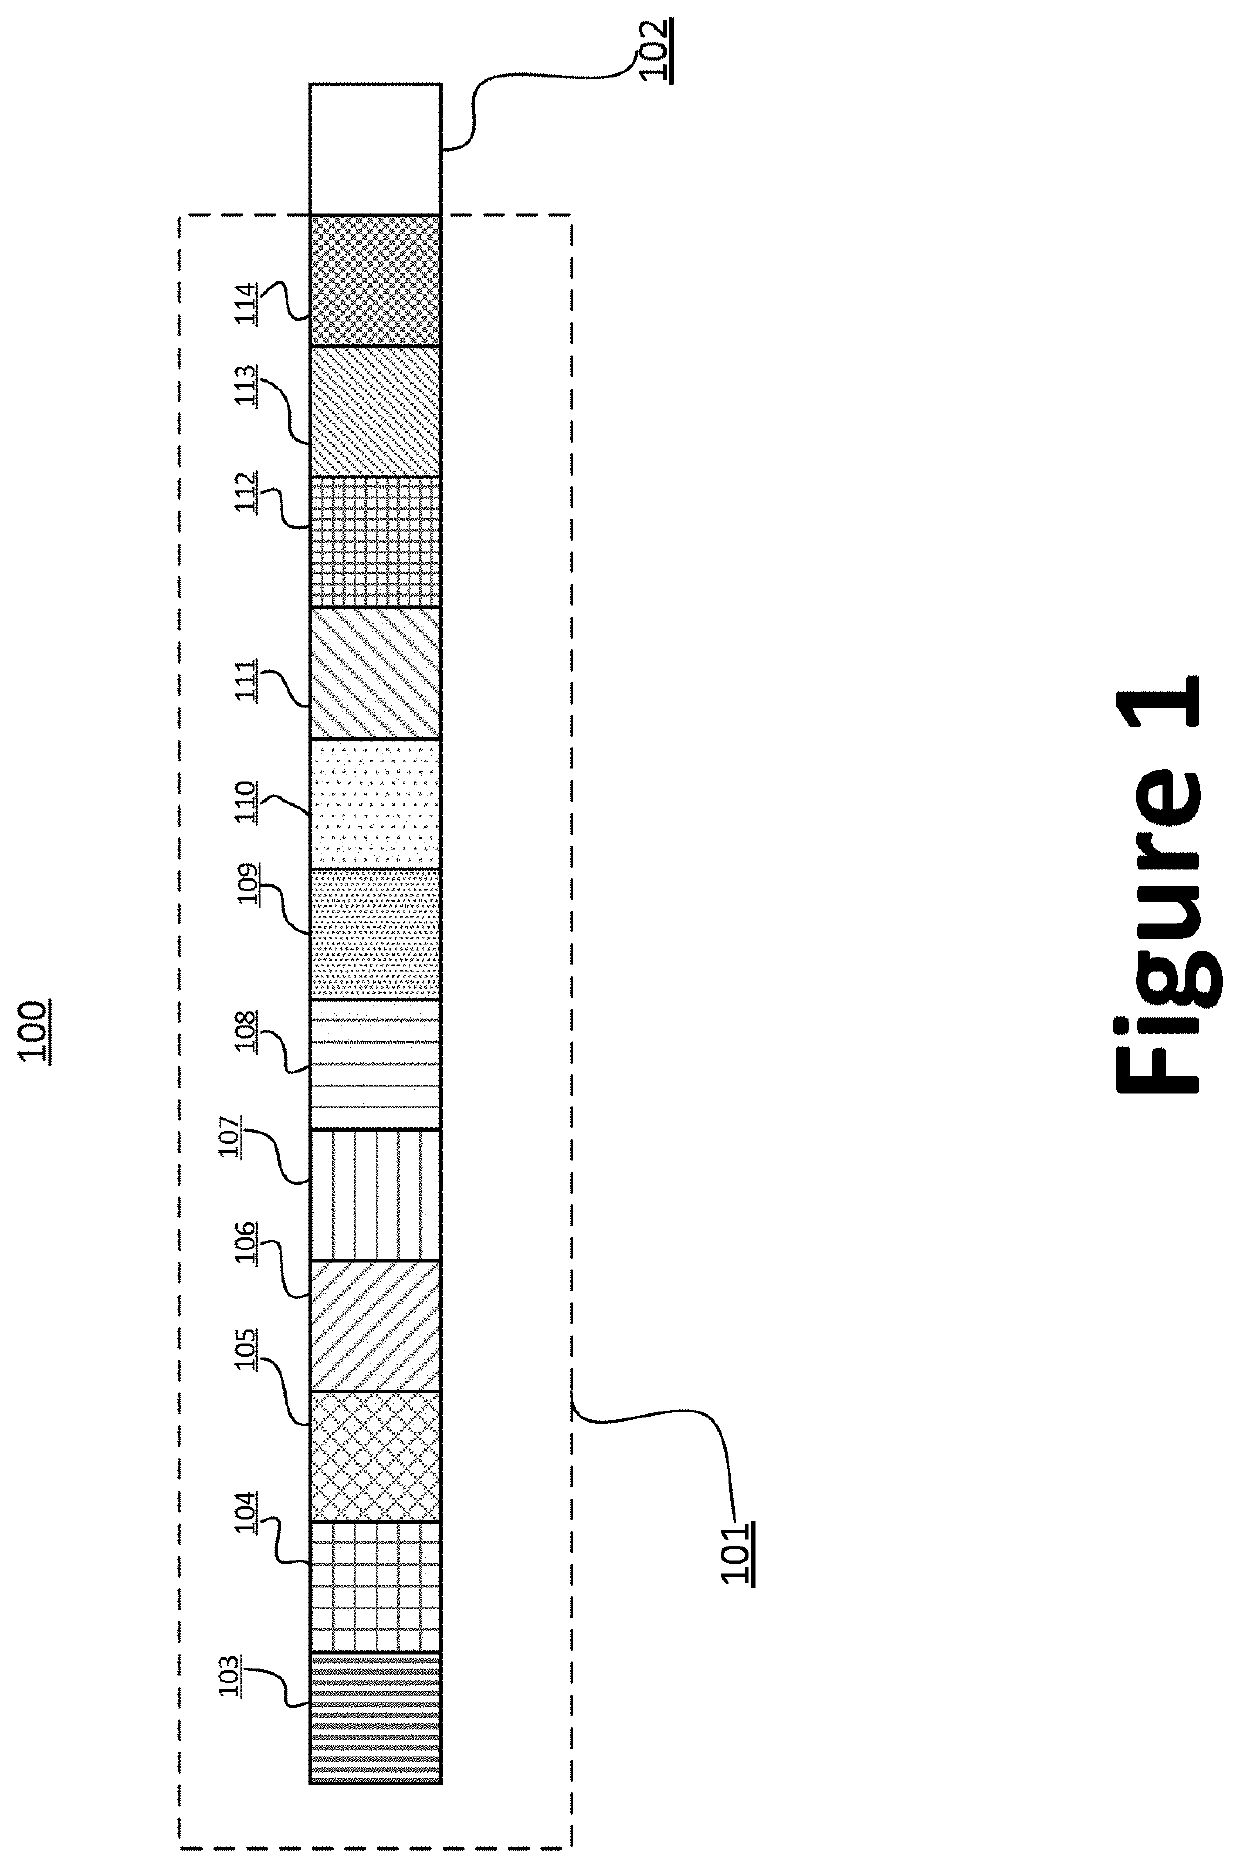 Systems and methods for interleaved hamming encoding and decoding